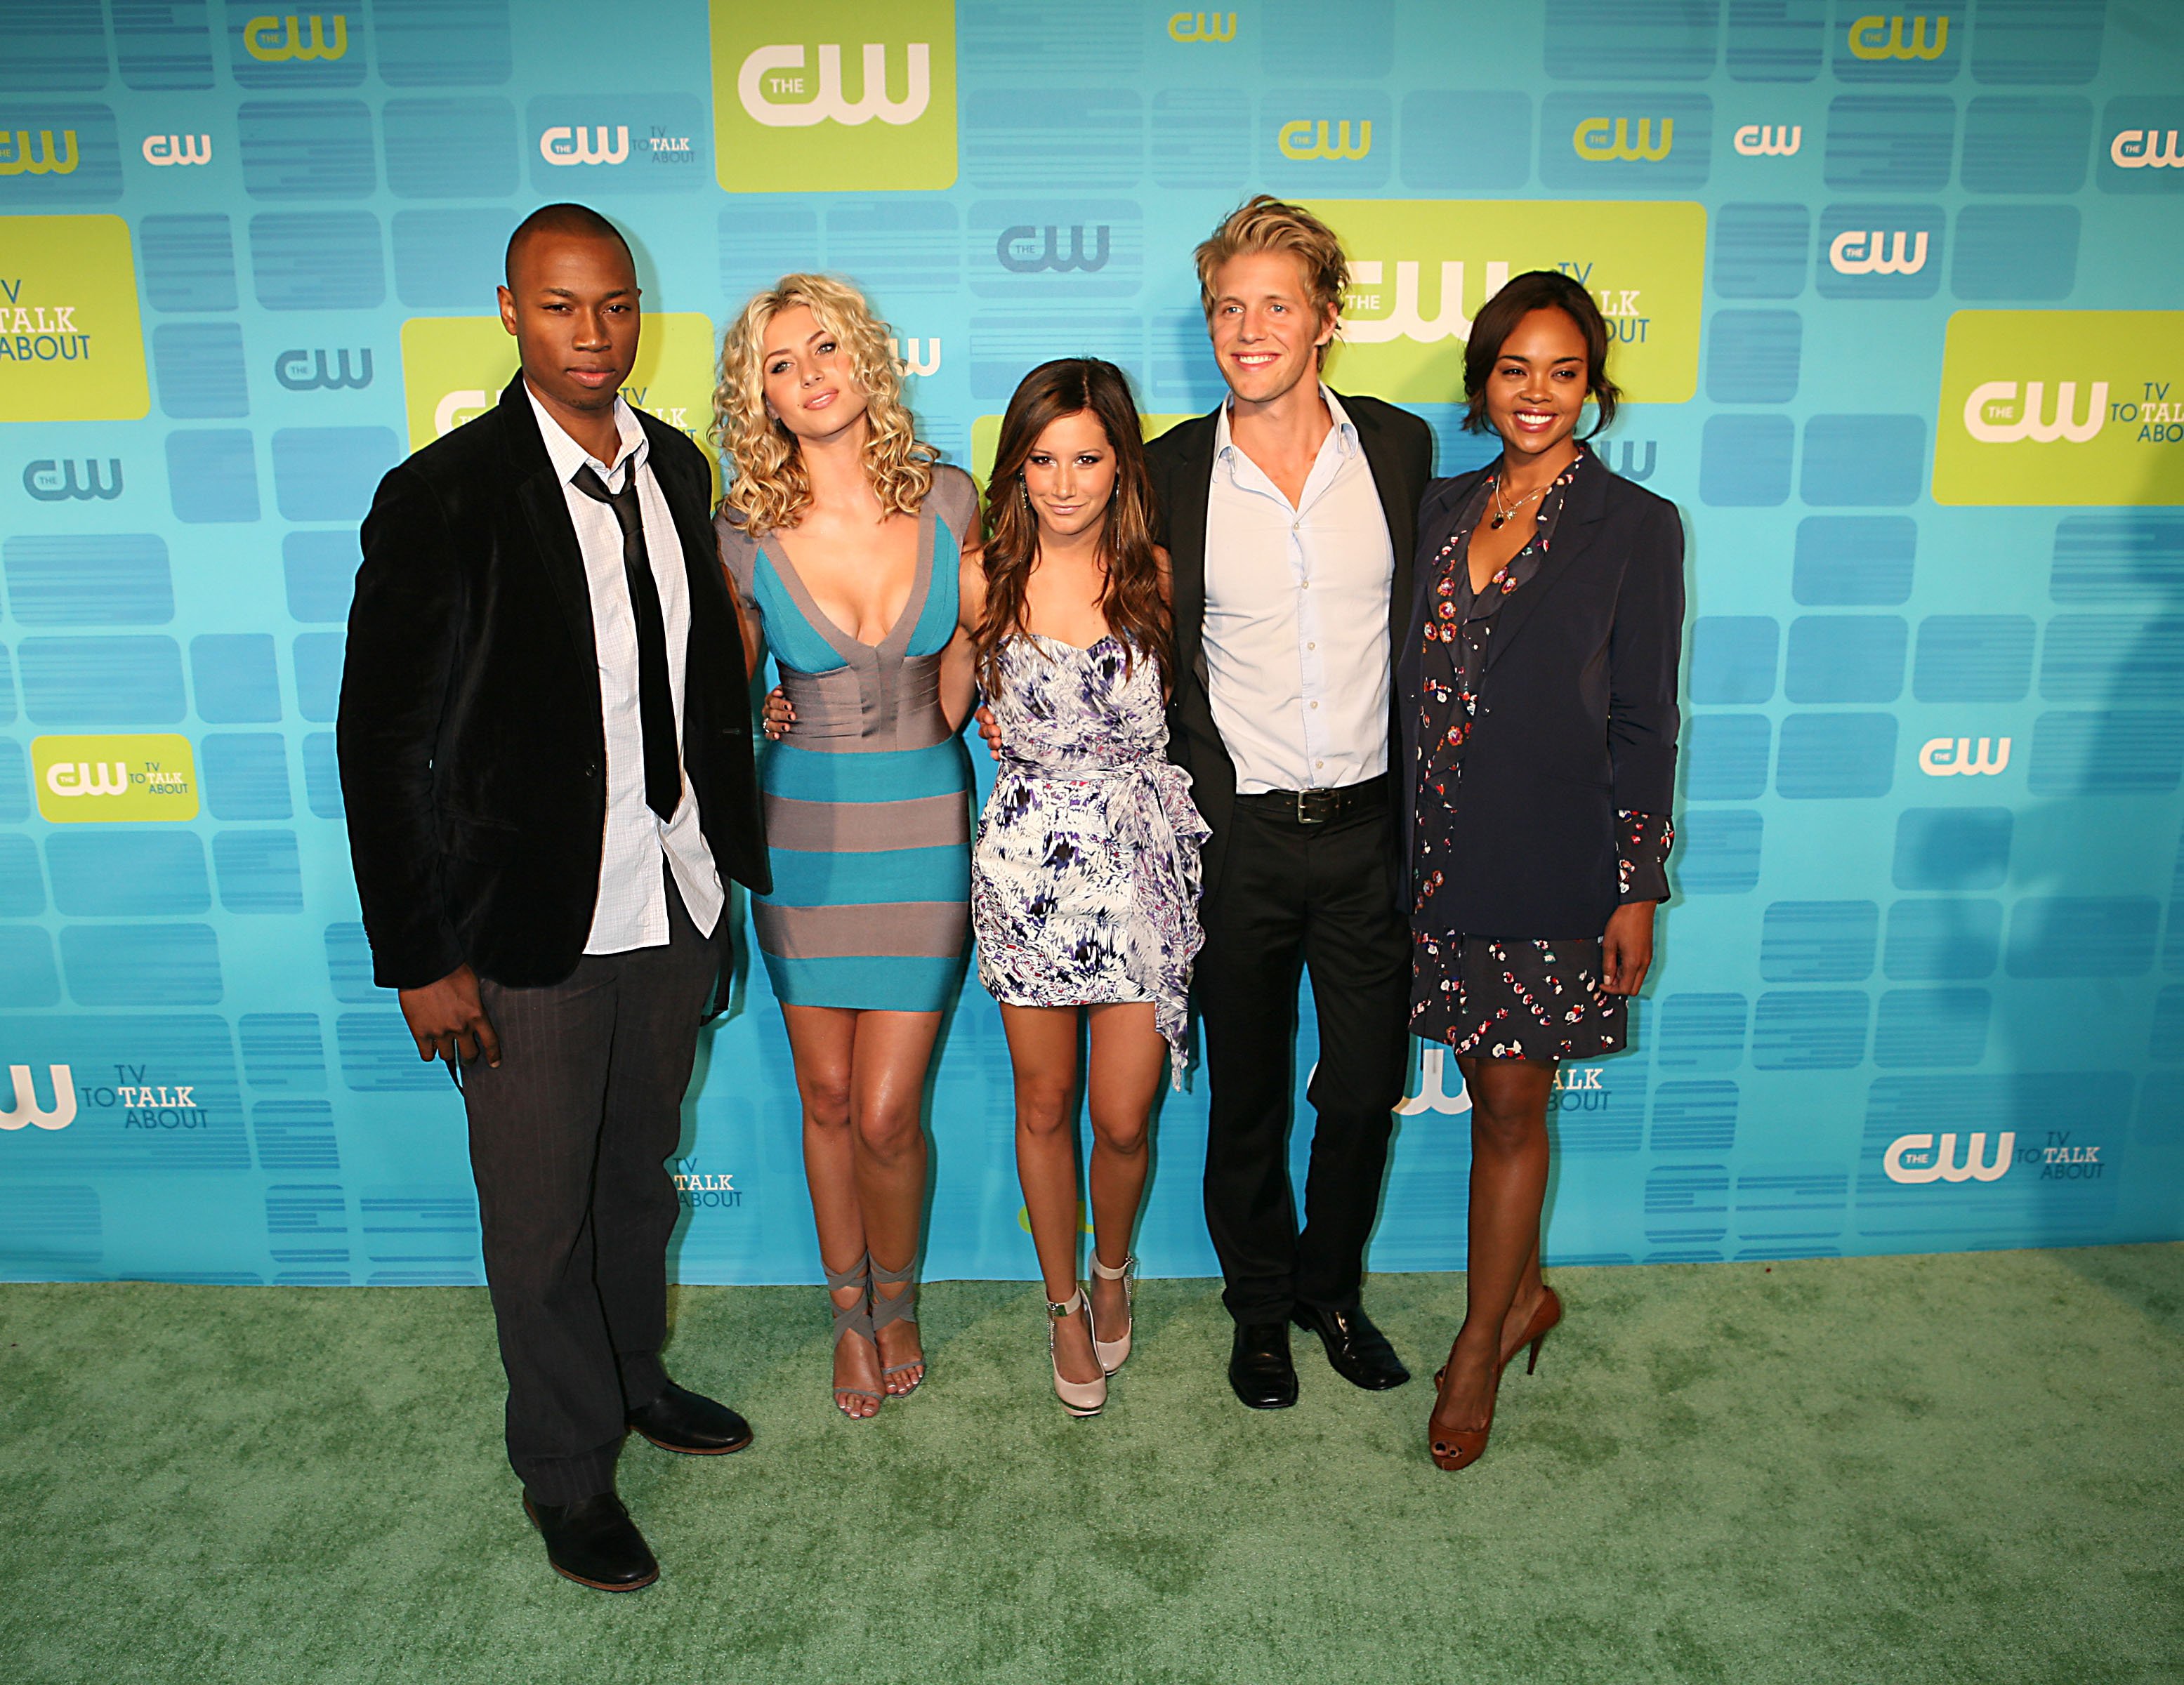 aly-michalka-at-the-cw-upfront-presentation-in-nyc-adds-16 GotCeleb 